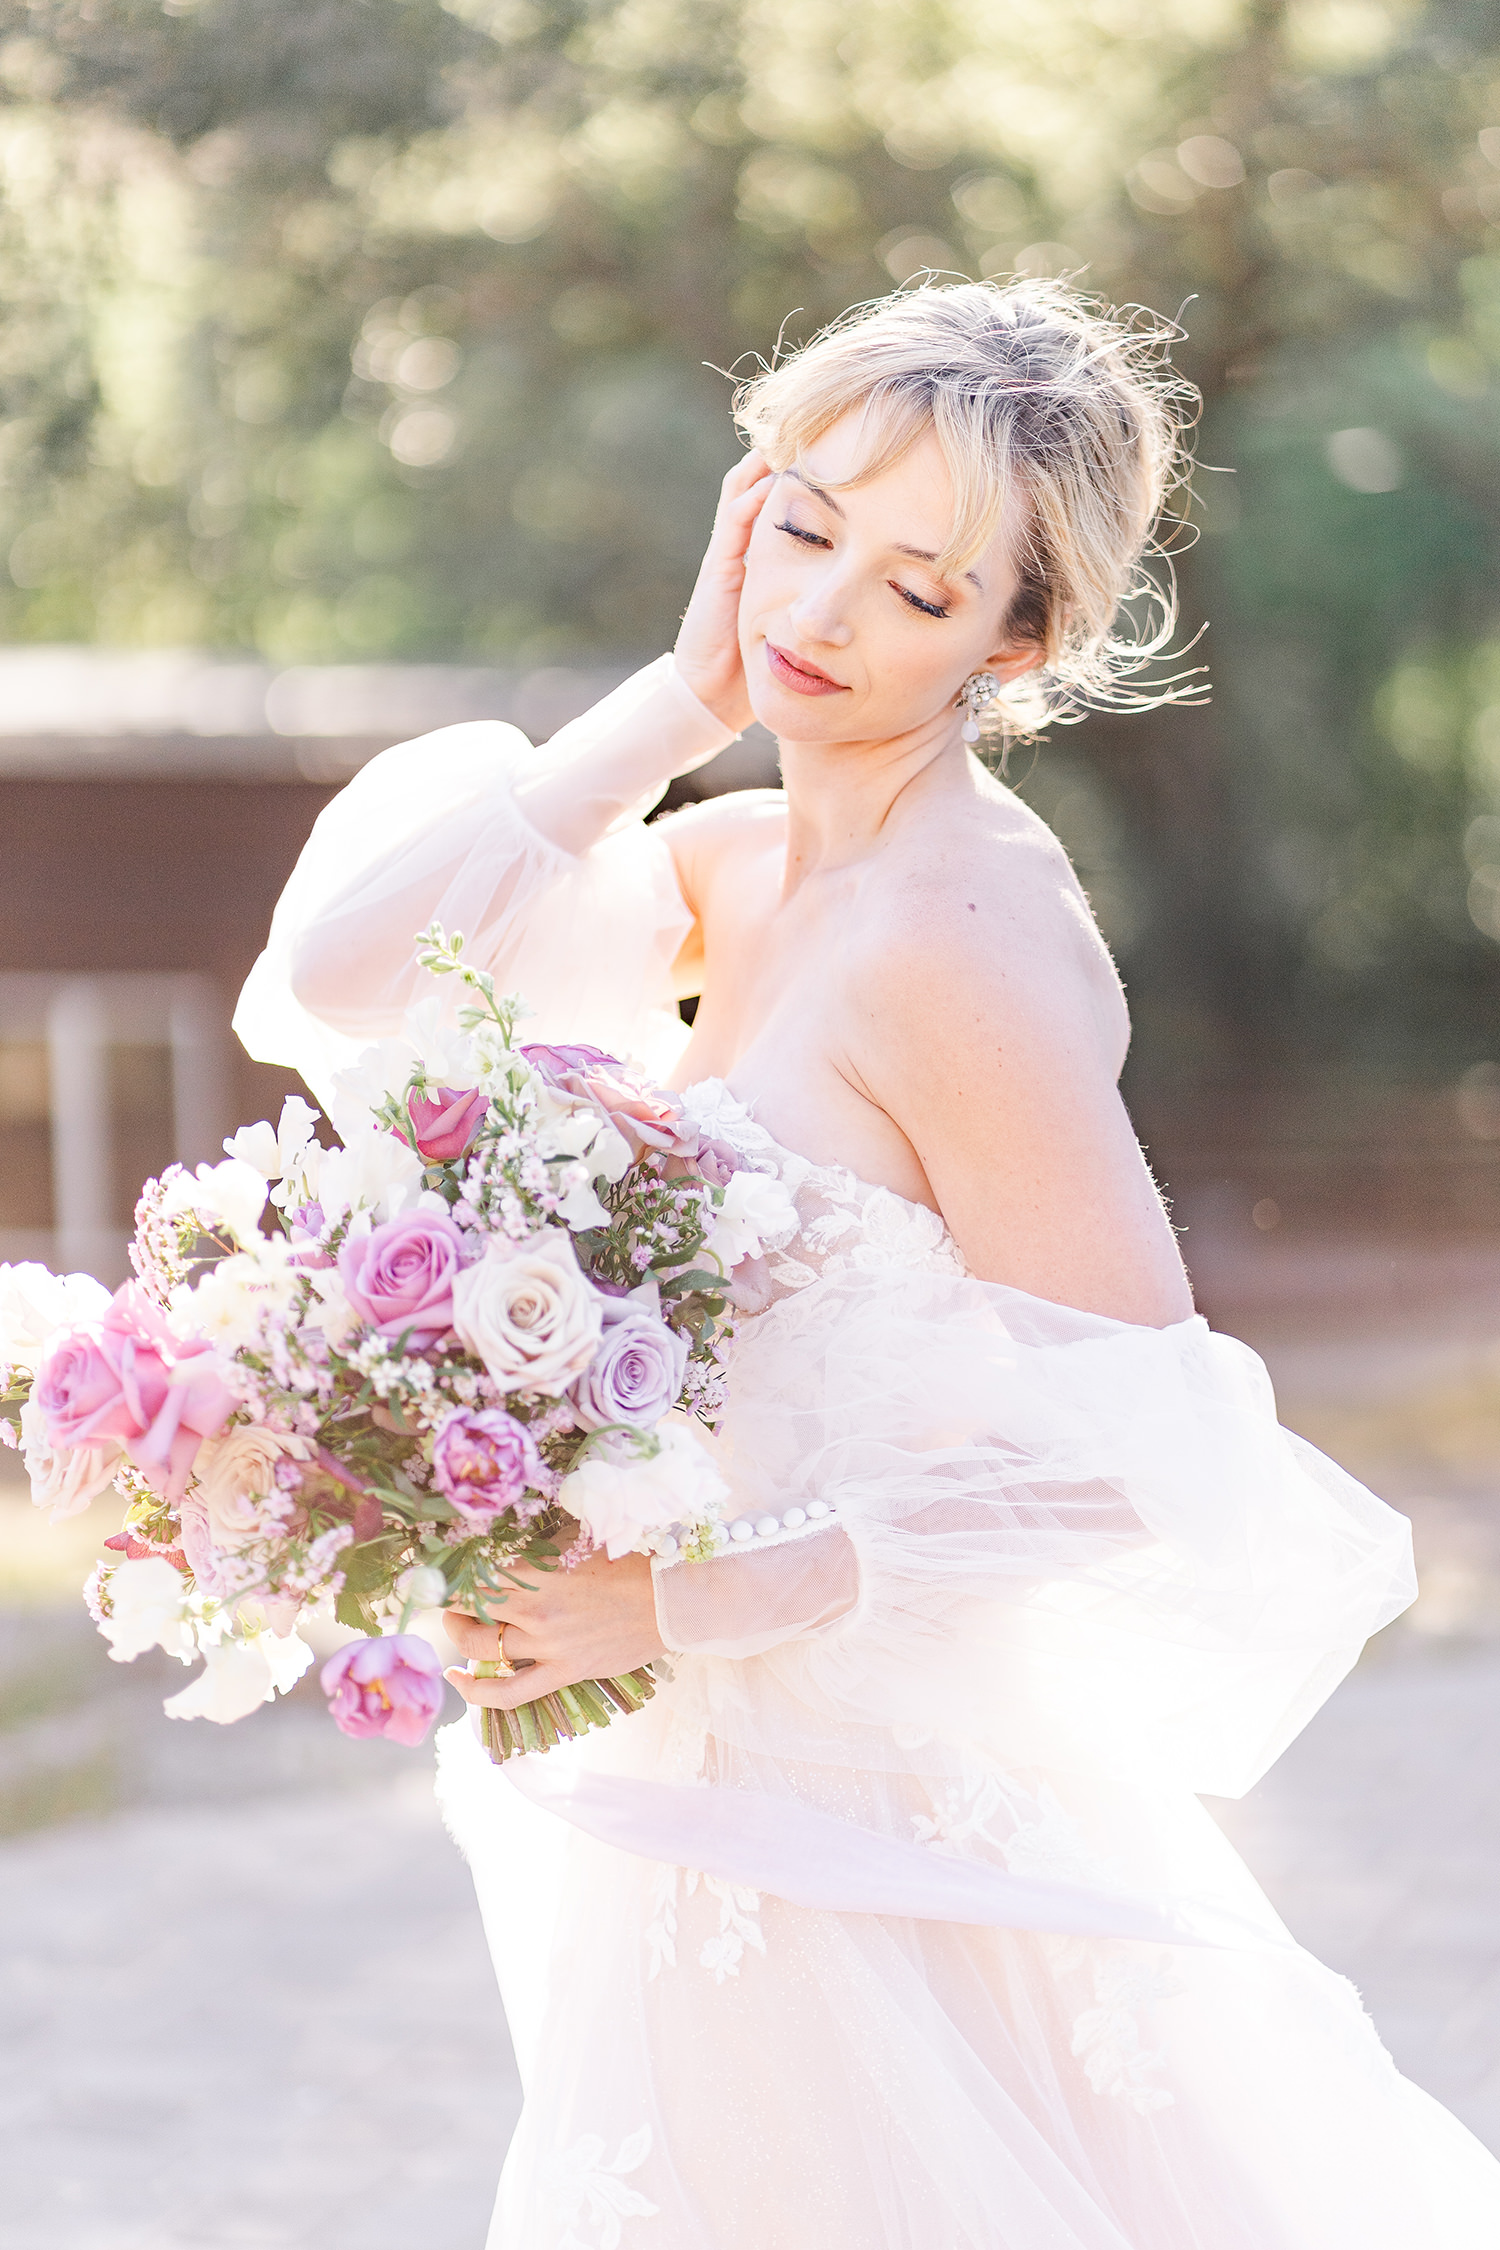 Wedding Day Bridal Portraits by Adrienne and Dani Photography